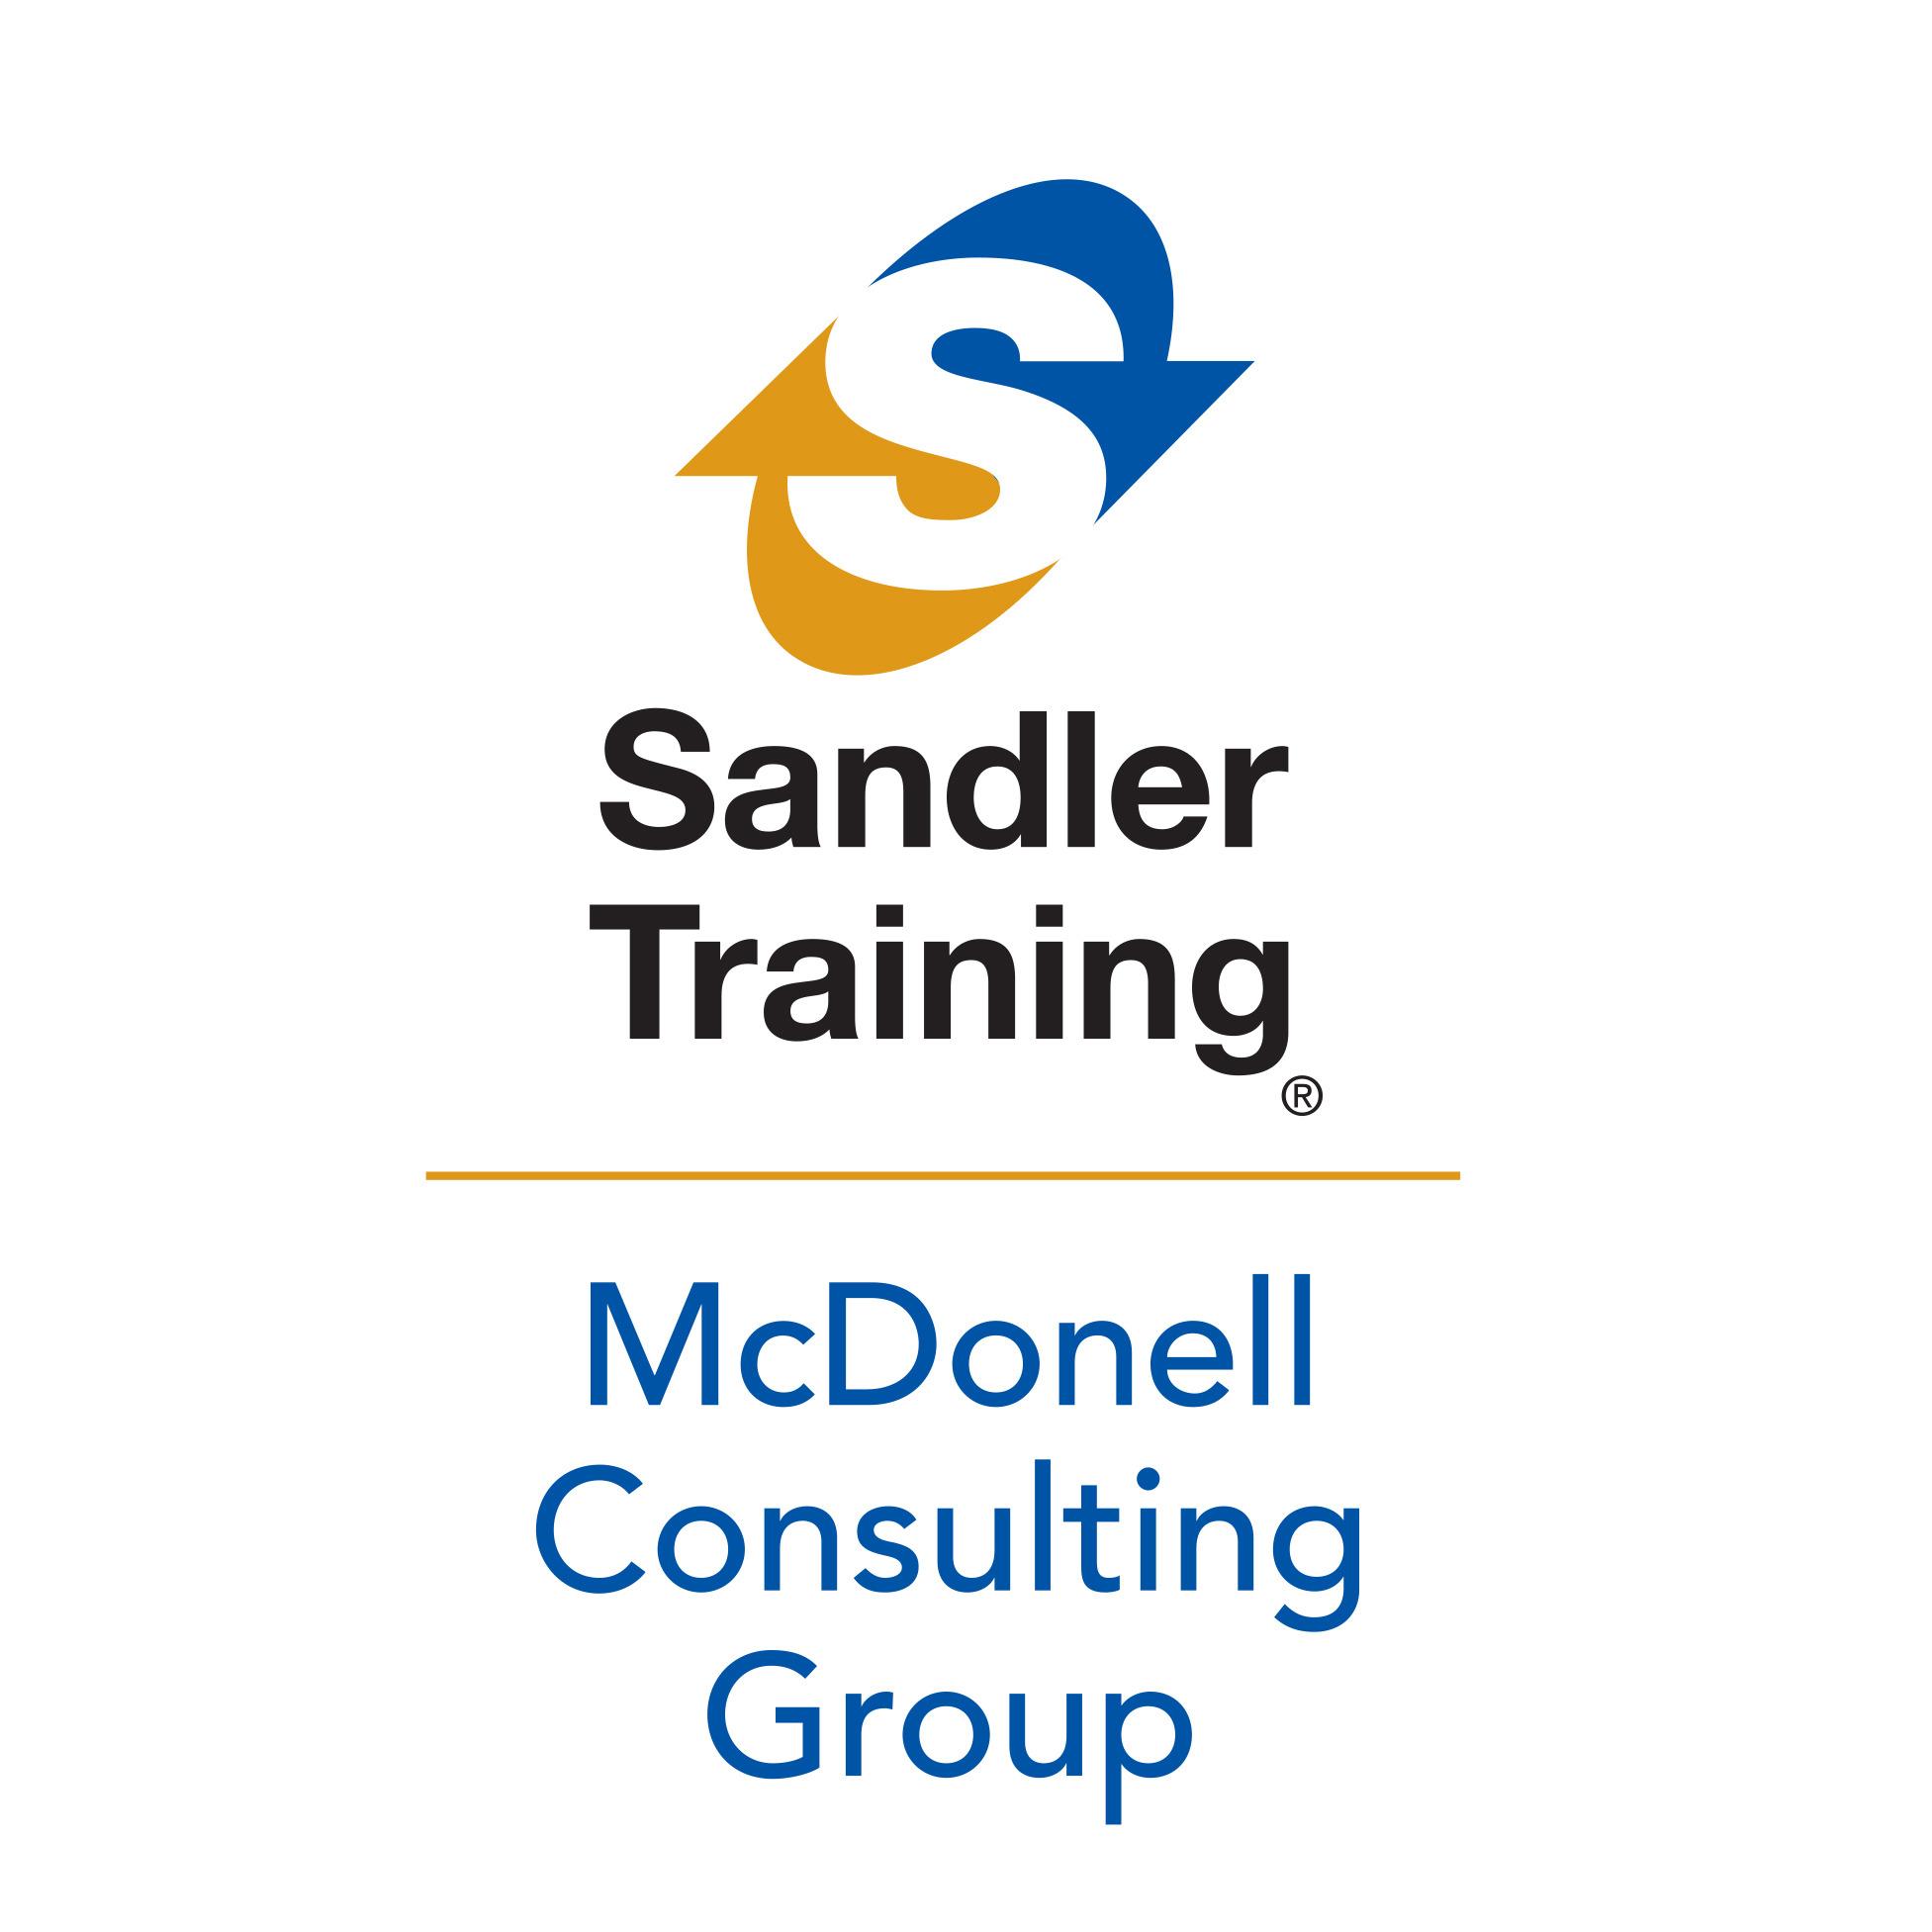 McDonell Consulting Group - Sandler Training Logo